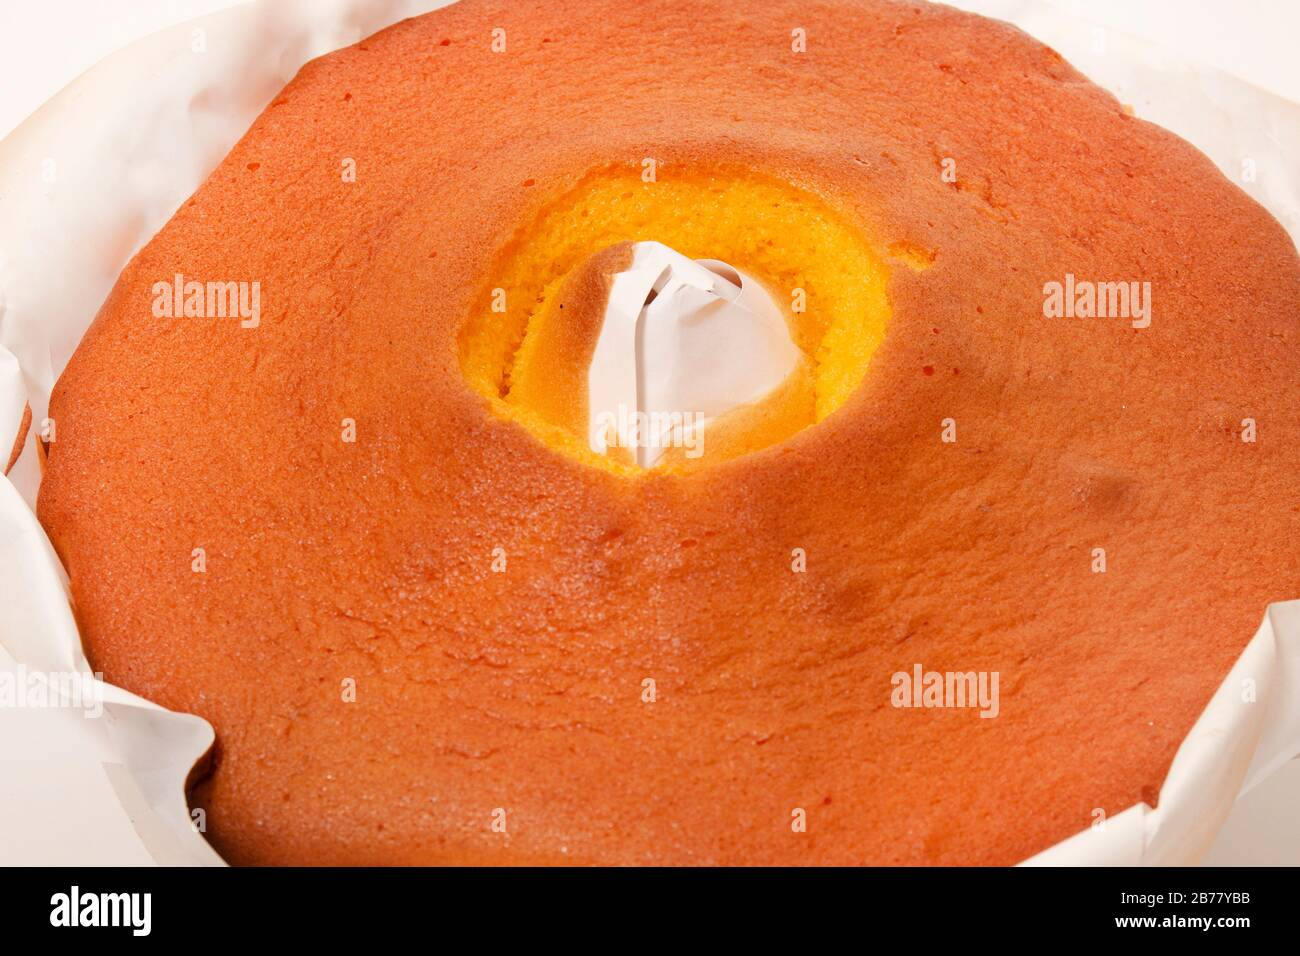 Pao De Lo De Ovar Typical Cake Of Portugal Homemade Wrapped In Paper Stock Photo Alamy